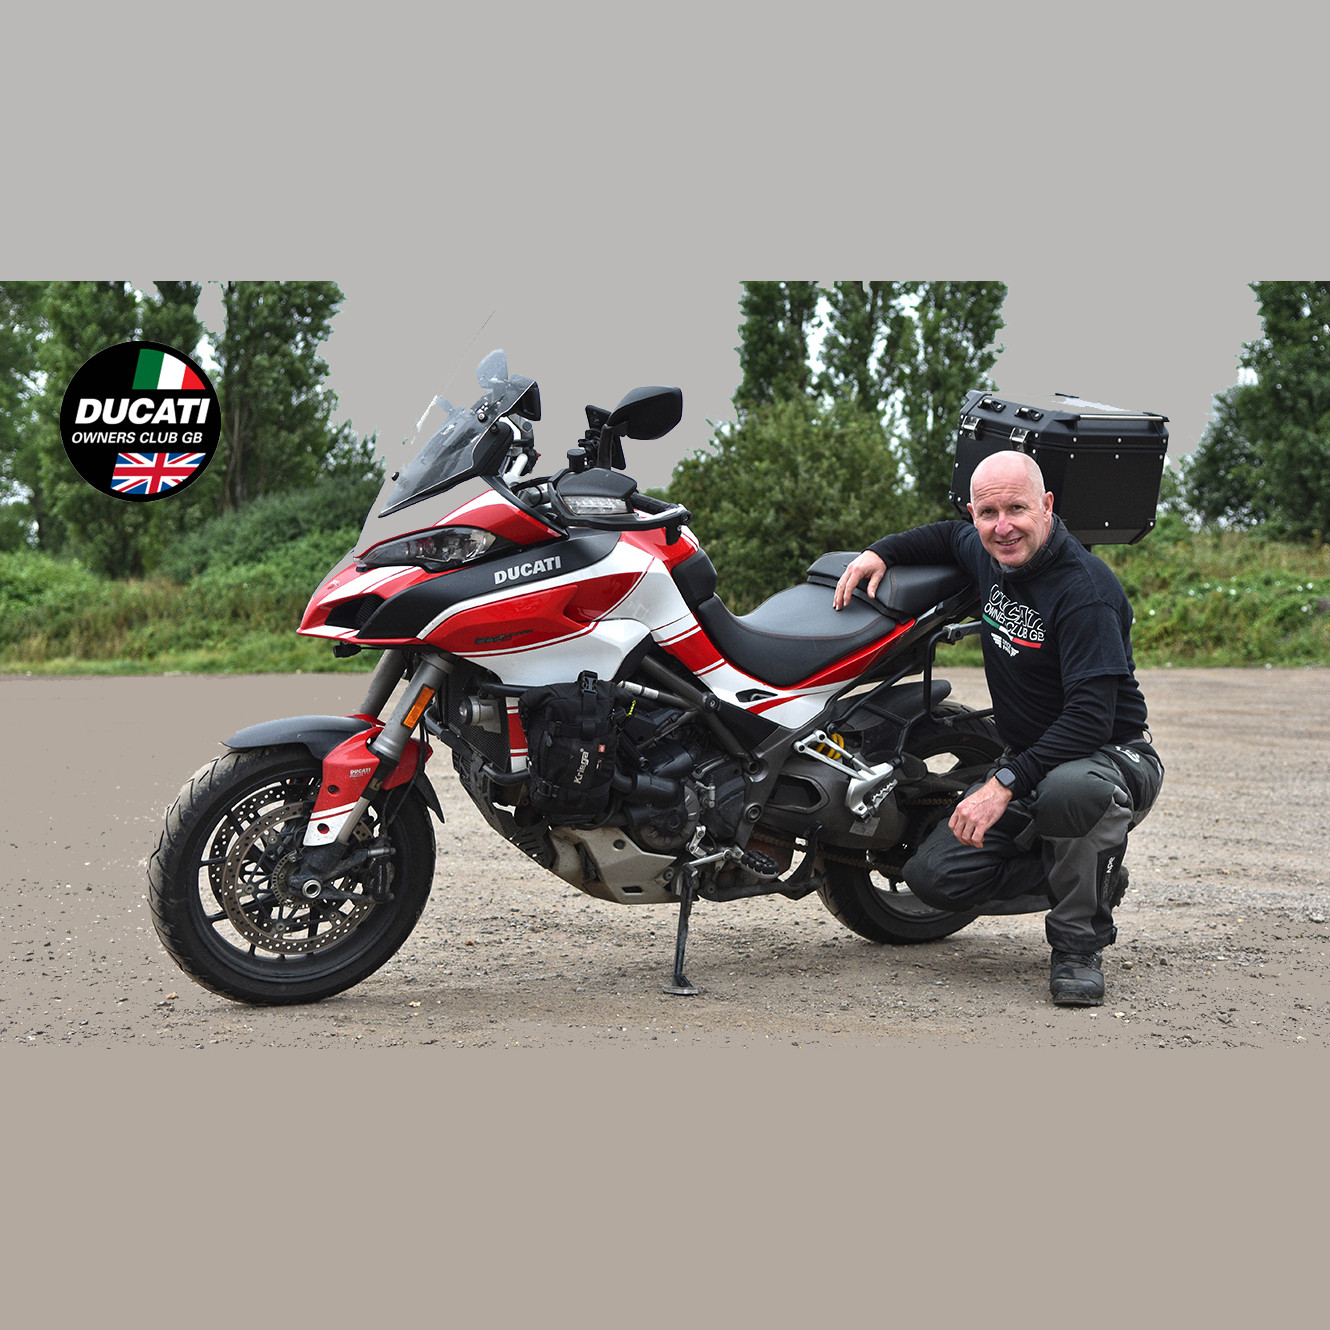 Ducati Owners Club GB: Events Co-ordinator Steve Staines planning a personal Paul Smart tribute ride to World Ducati Week